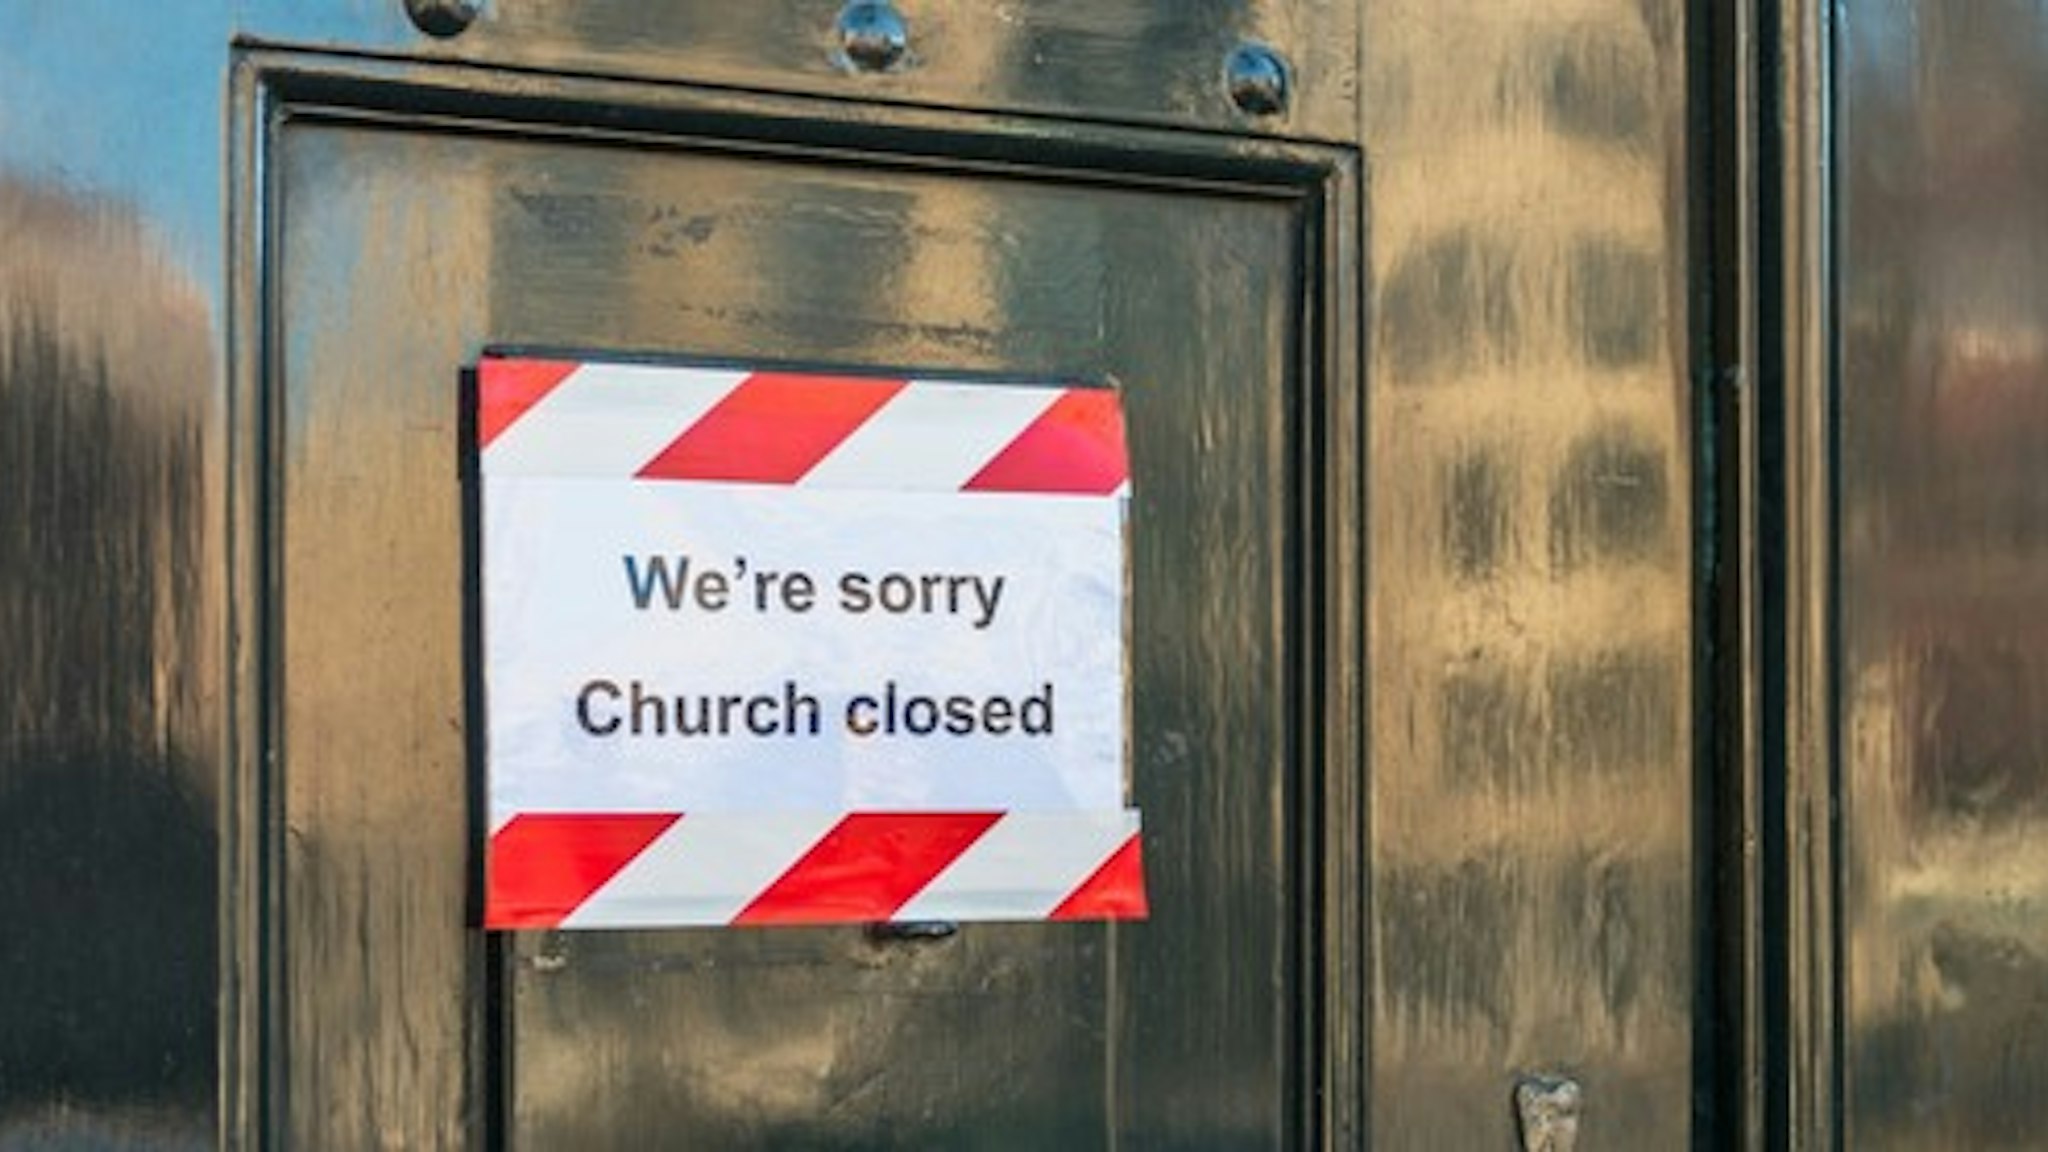 Closed church in Amsterdam, Netherlands. As of March 12 2020, The Dutch government mandated the closure of public places to avoid the spread of the coronavirus.